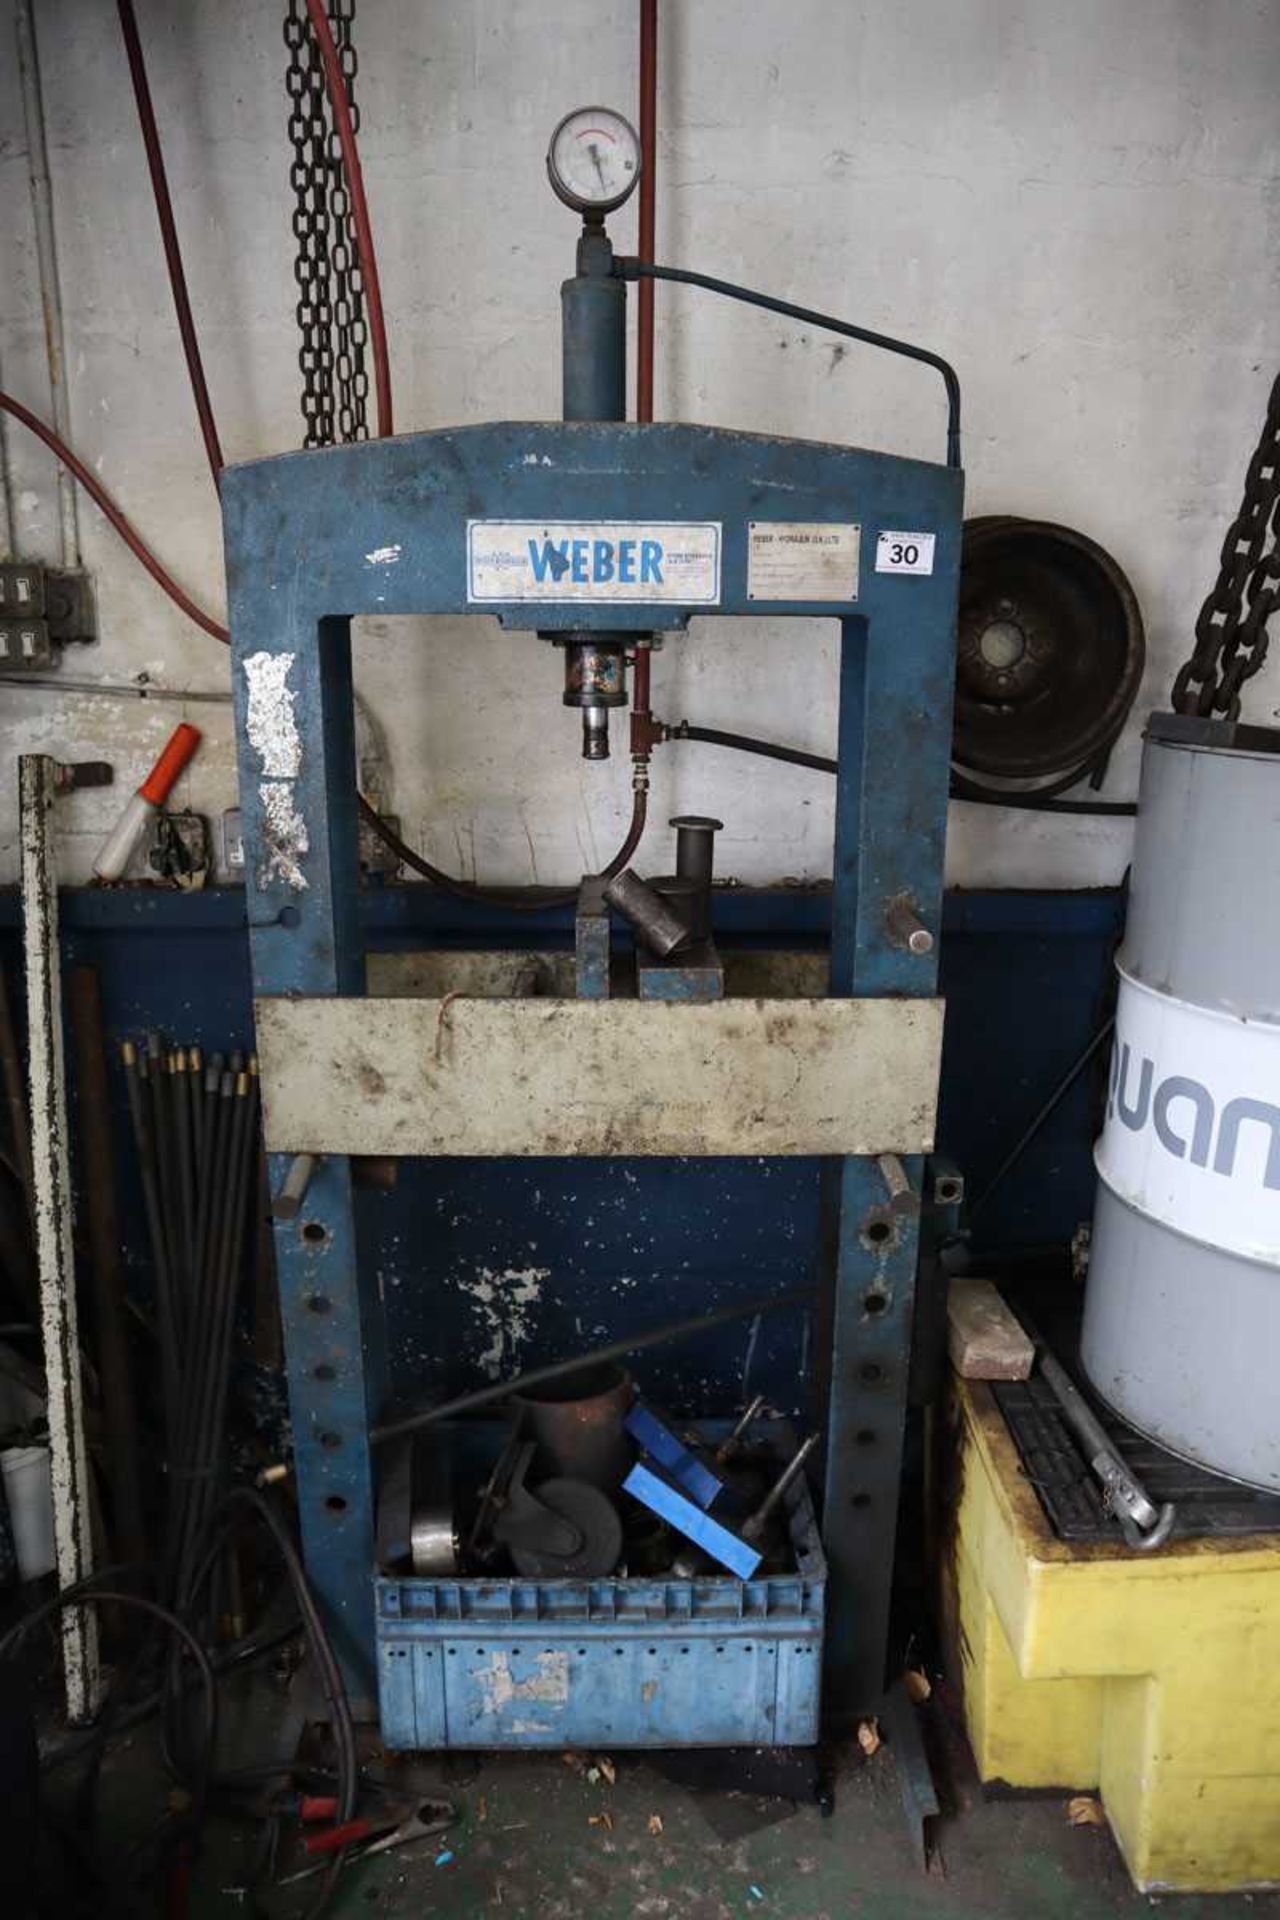 +VAT Weber model: 309 10 ton capacity press with assorted tooling